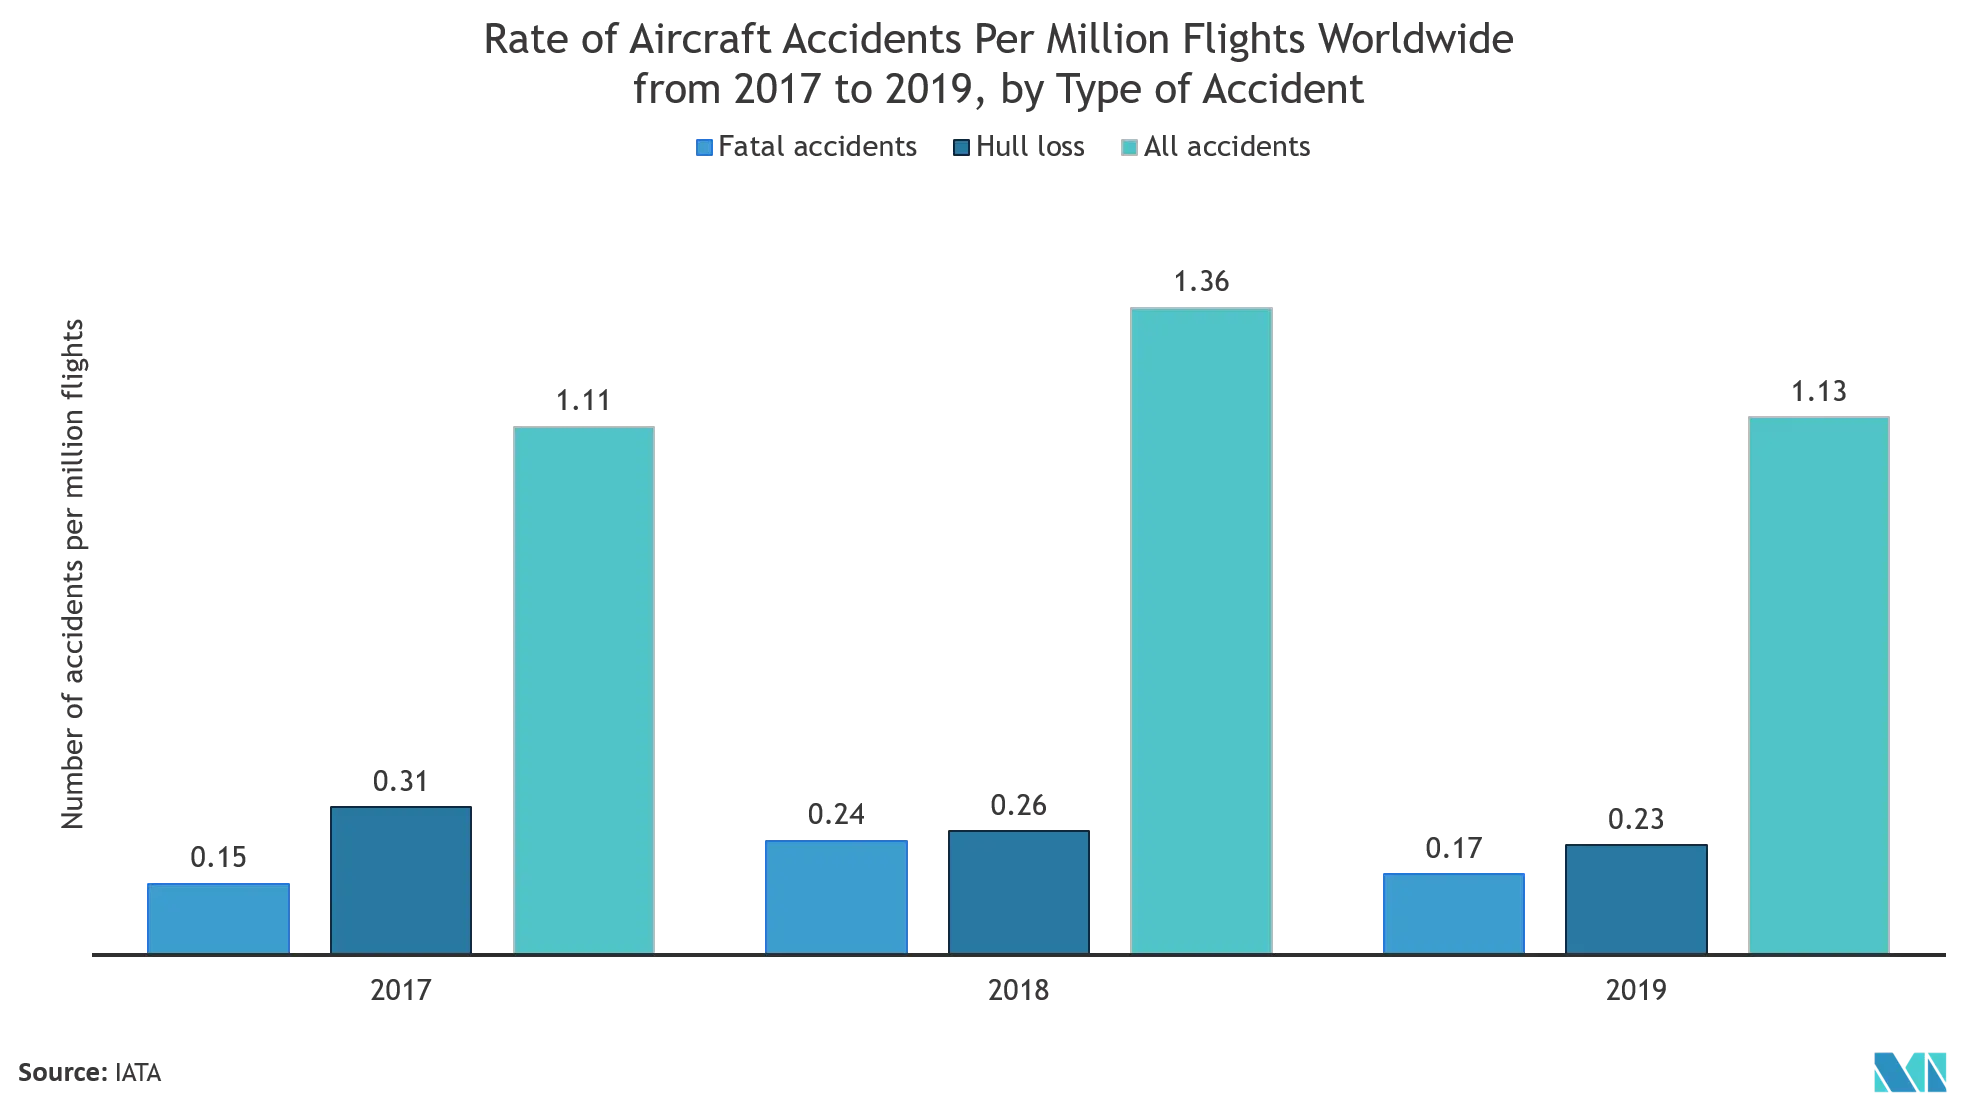 Emergency Location Transmitter Market: Rate of Aircraft Accidents Per Million Flights Worldwide from 2017 to 2019, by Type of Accident